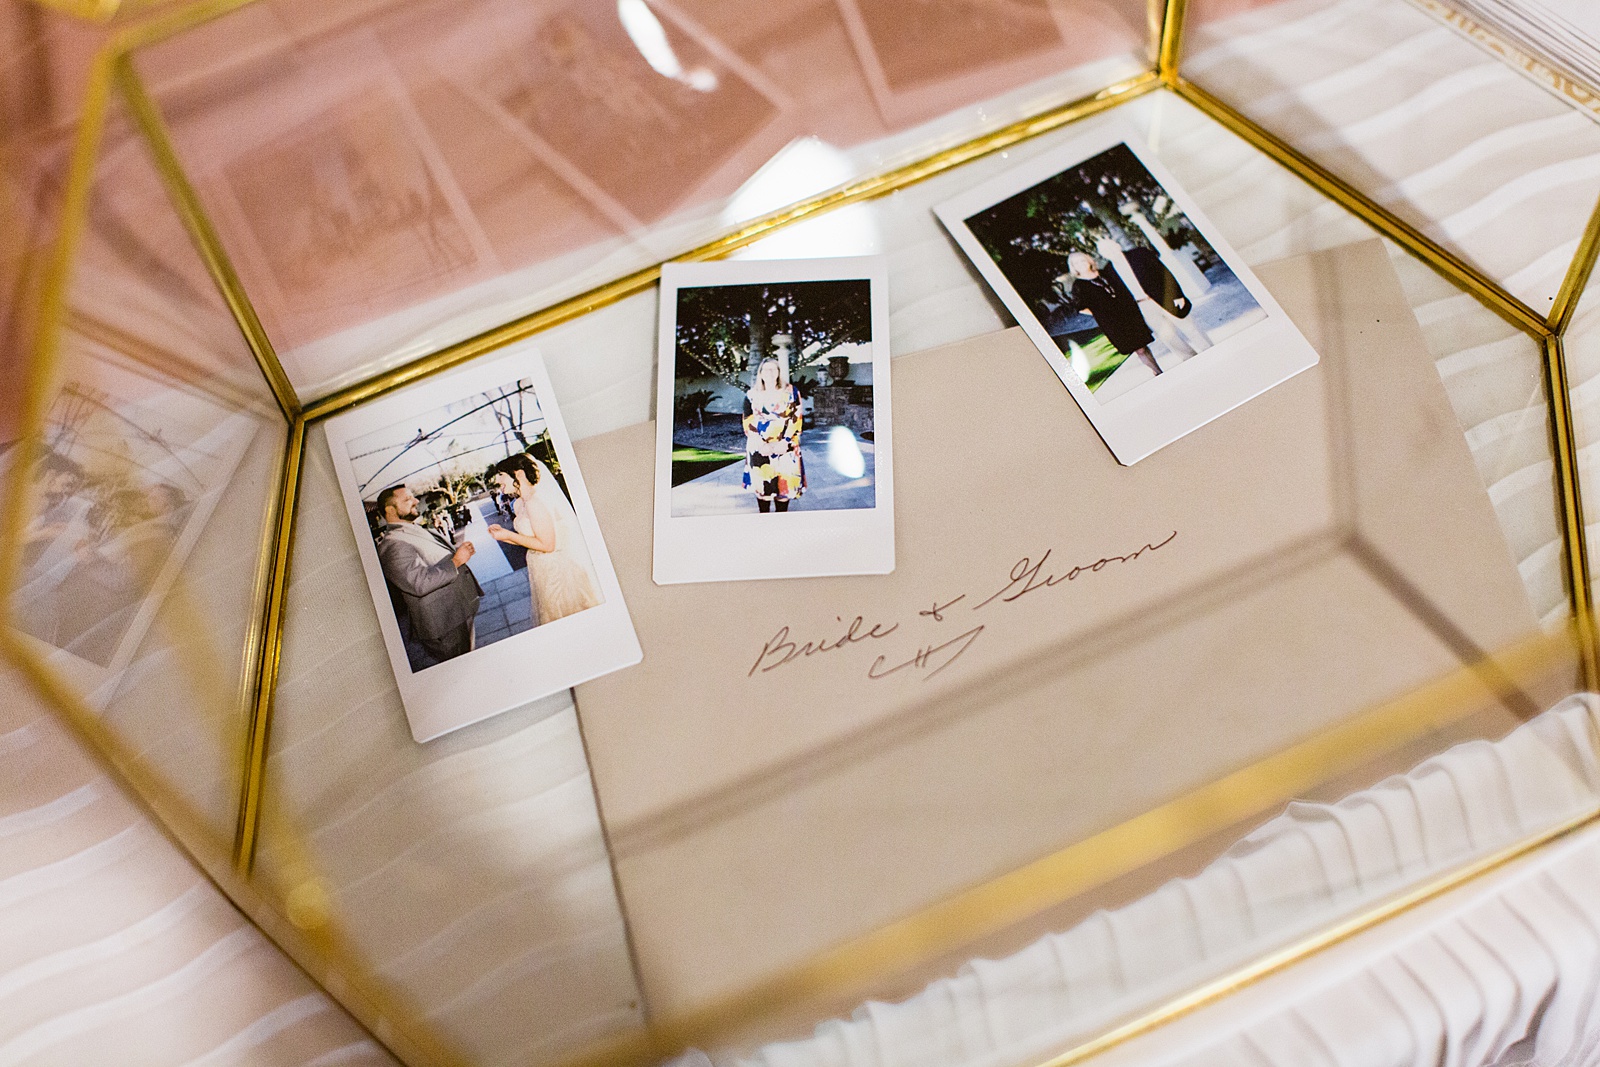 Polaroid pictures from a wedding inside of the card box by PMA Photography.